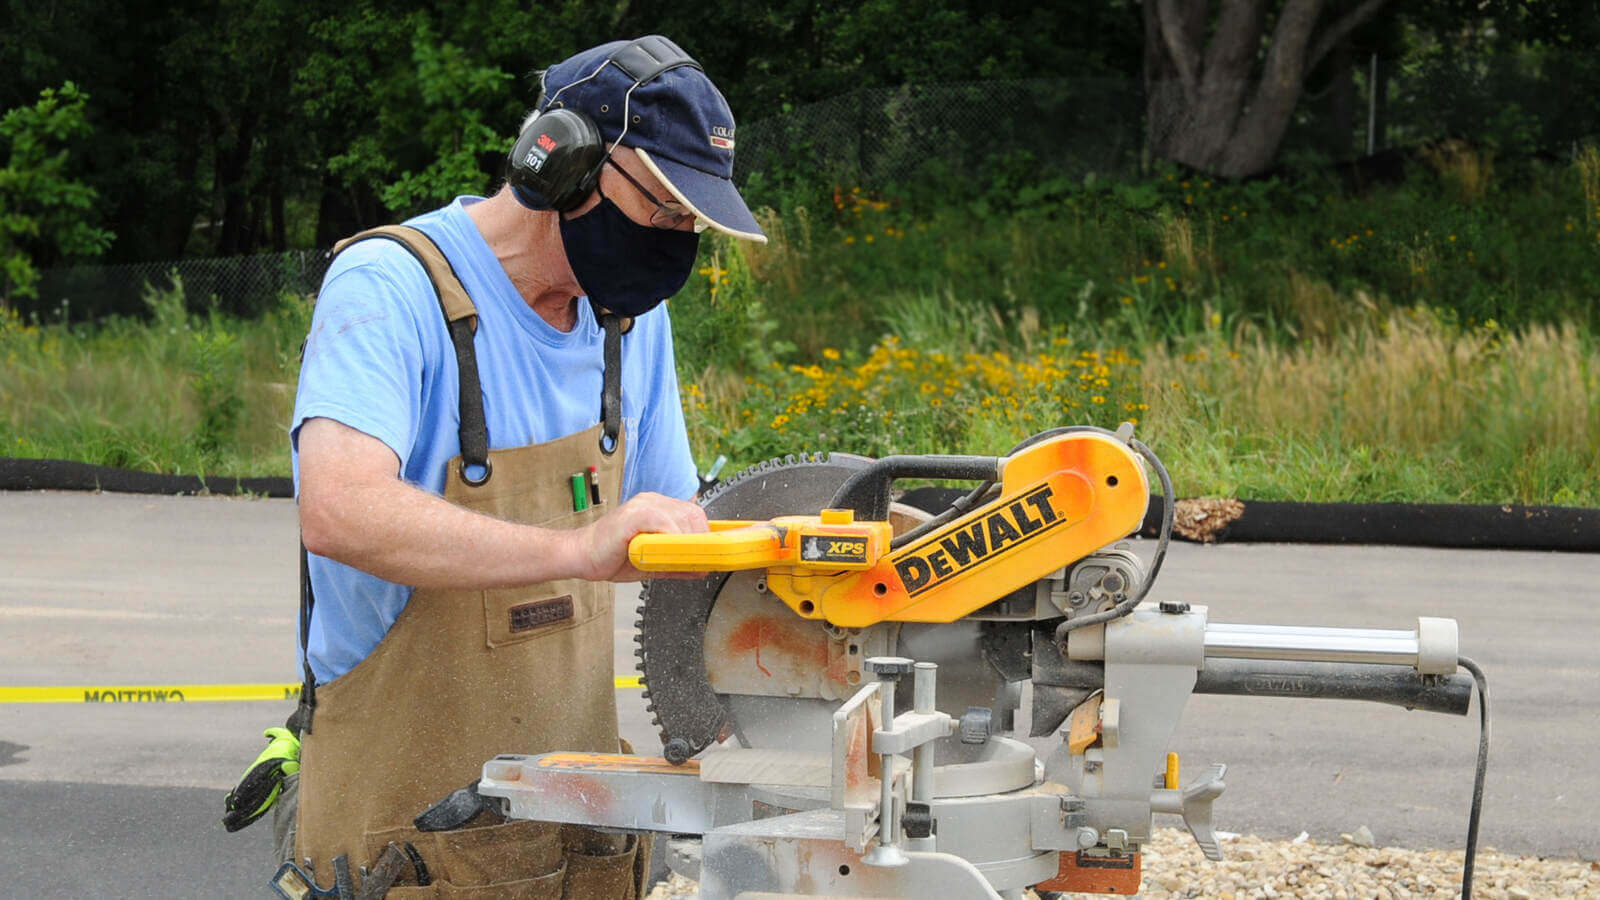 volunteer standing outdoors in a light blue shirt, tan overalls, blue baseball cap and a black mask, wearing ear protection while using a power saw.